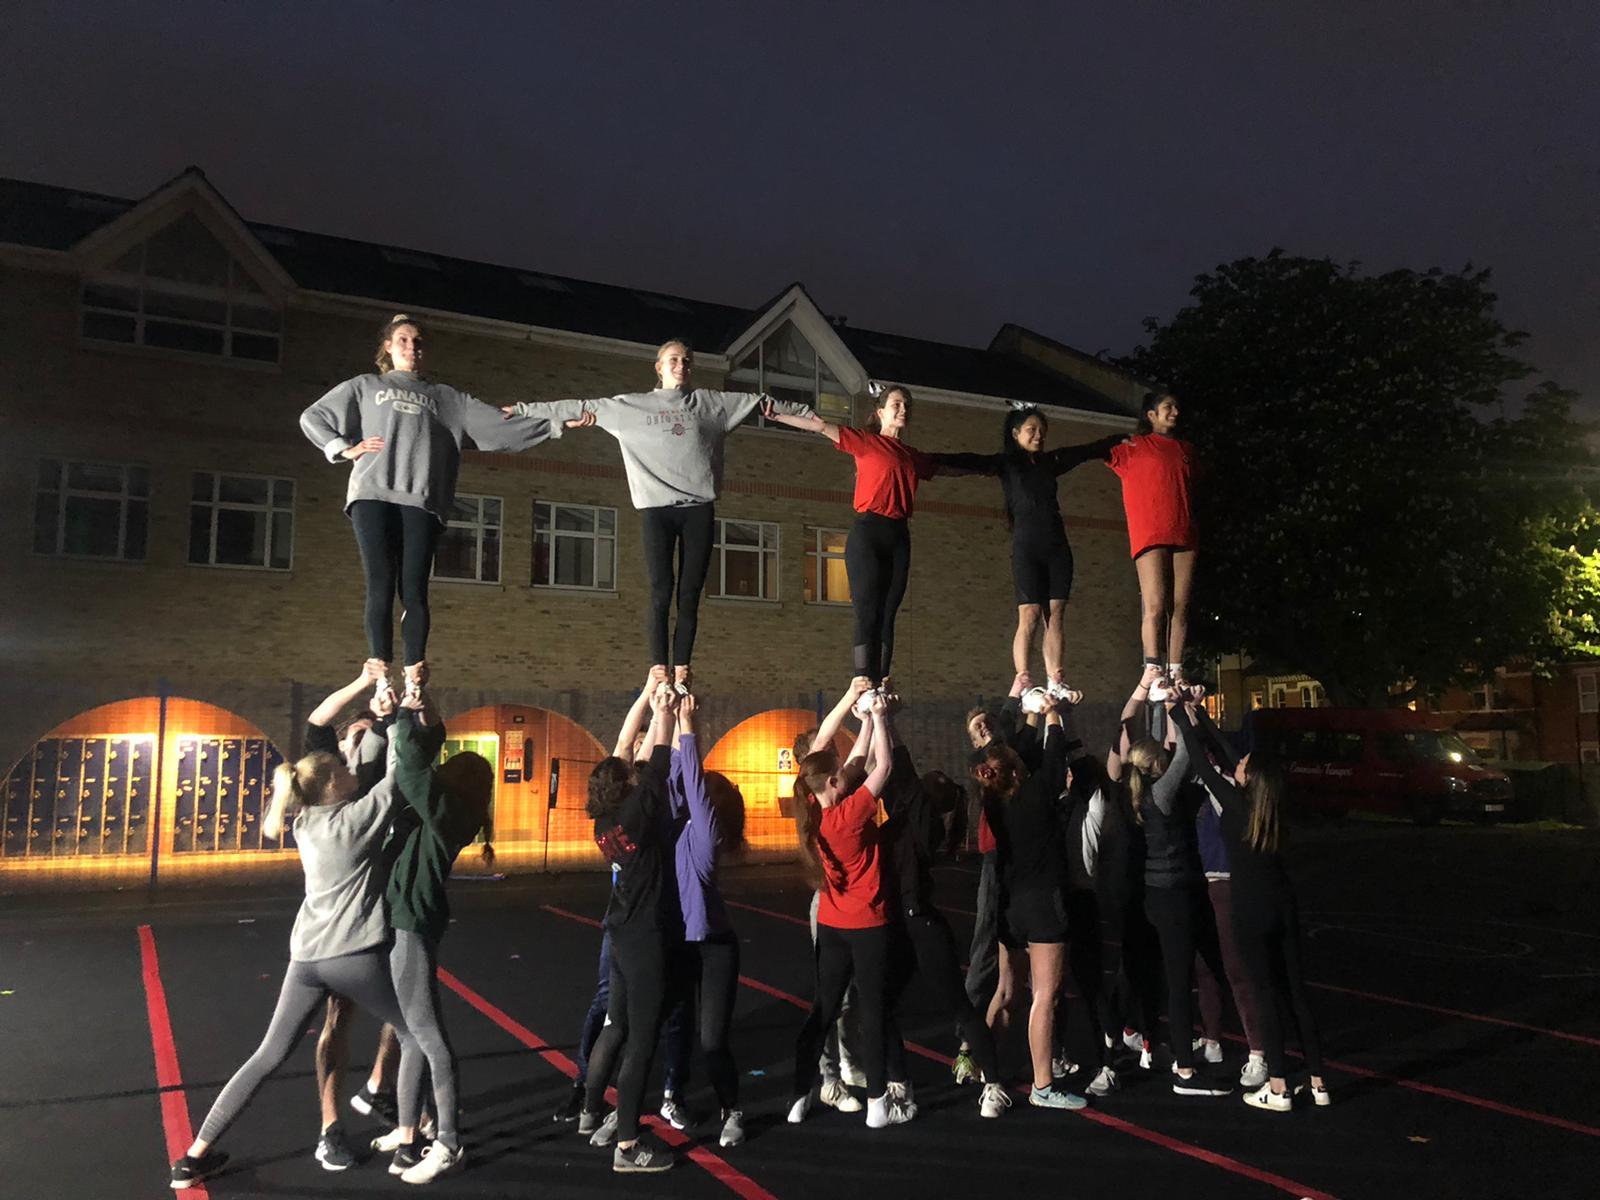 Ultimate Cheer train in Clapham South